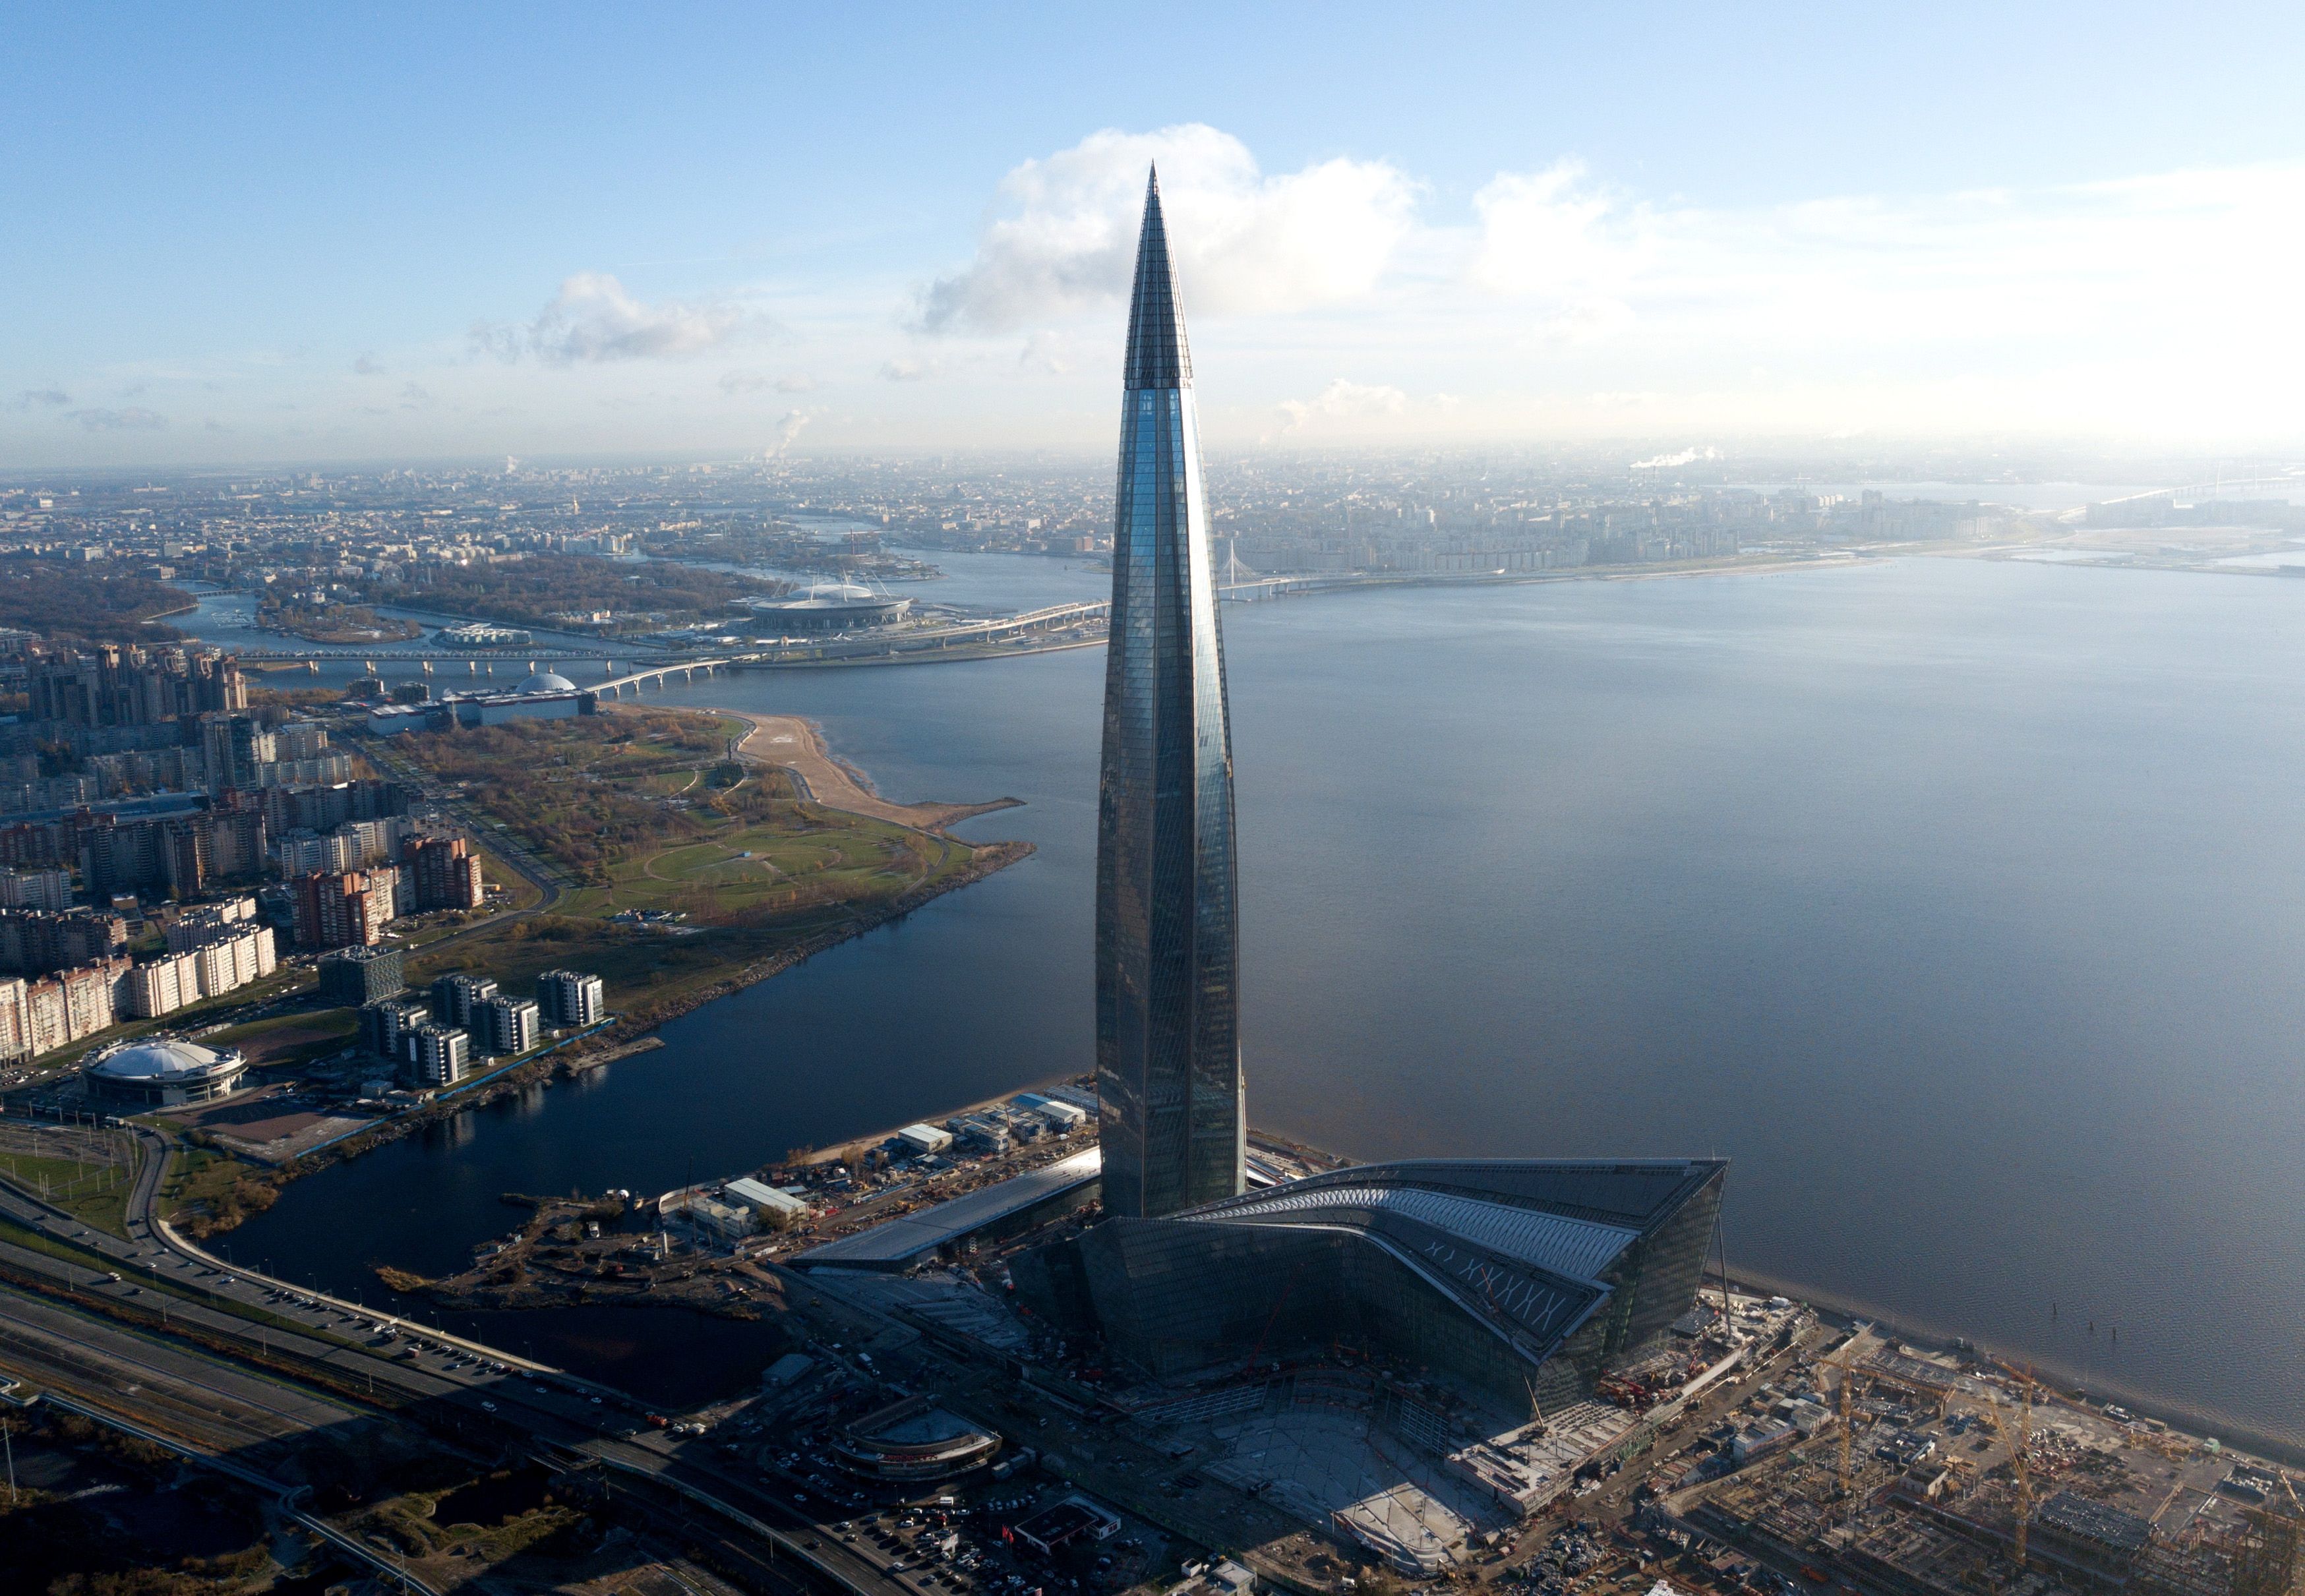 31 Tallest Buildings in the World